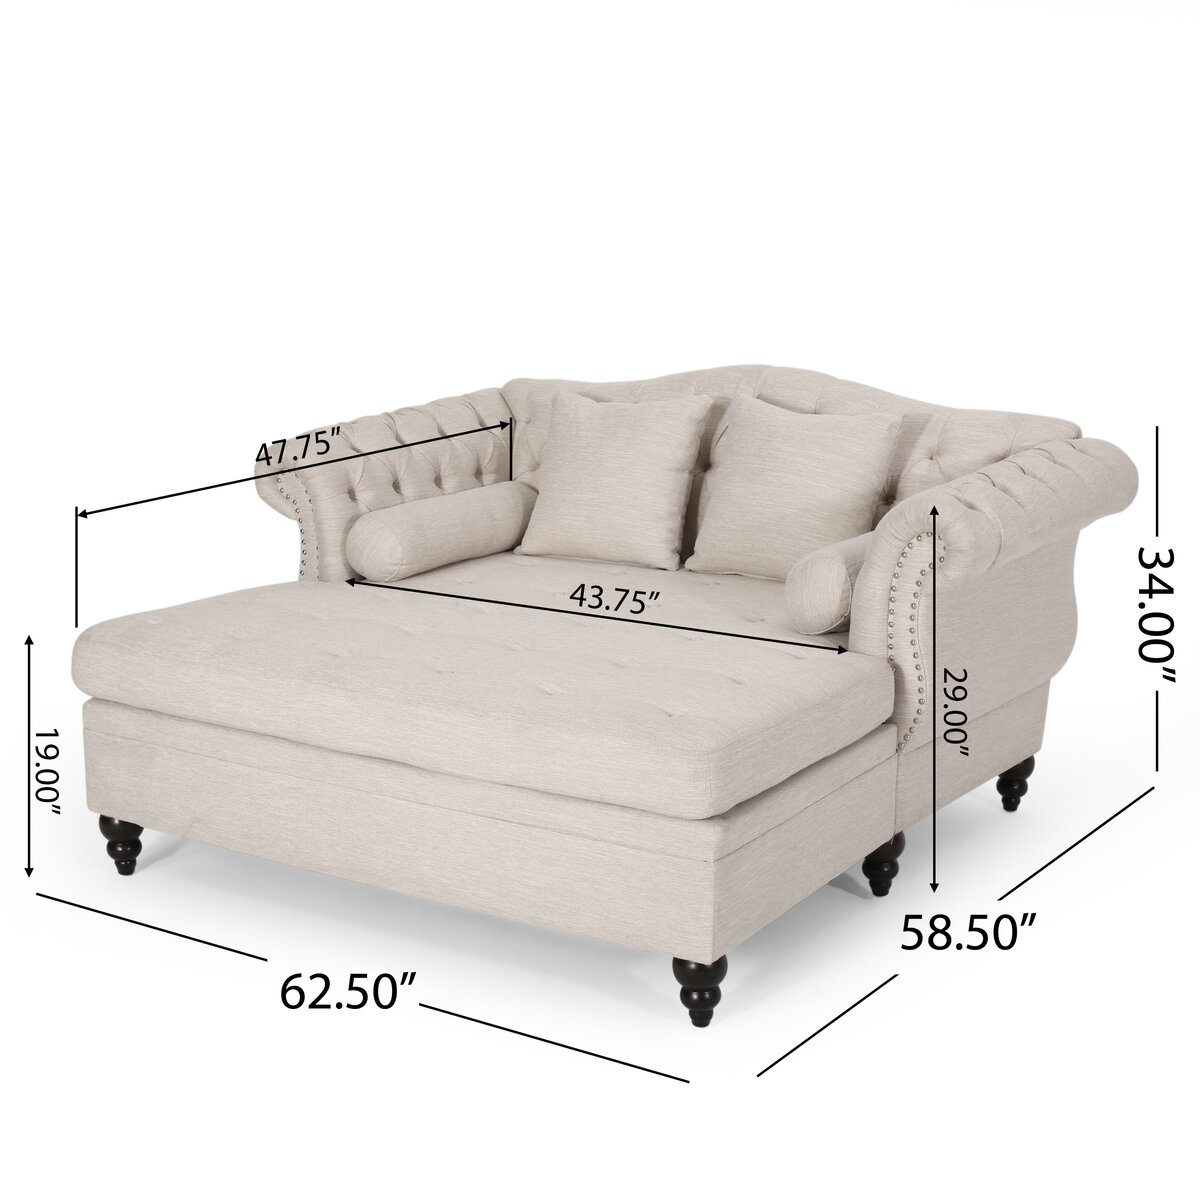 Darby Home Co Lamm Tufted Two Flared Arms Chaise Lounge & Reviews | Wayfair